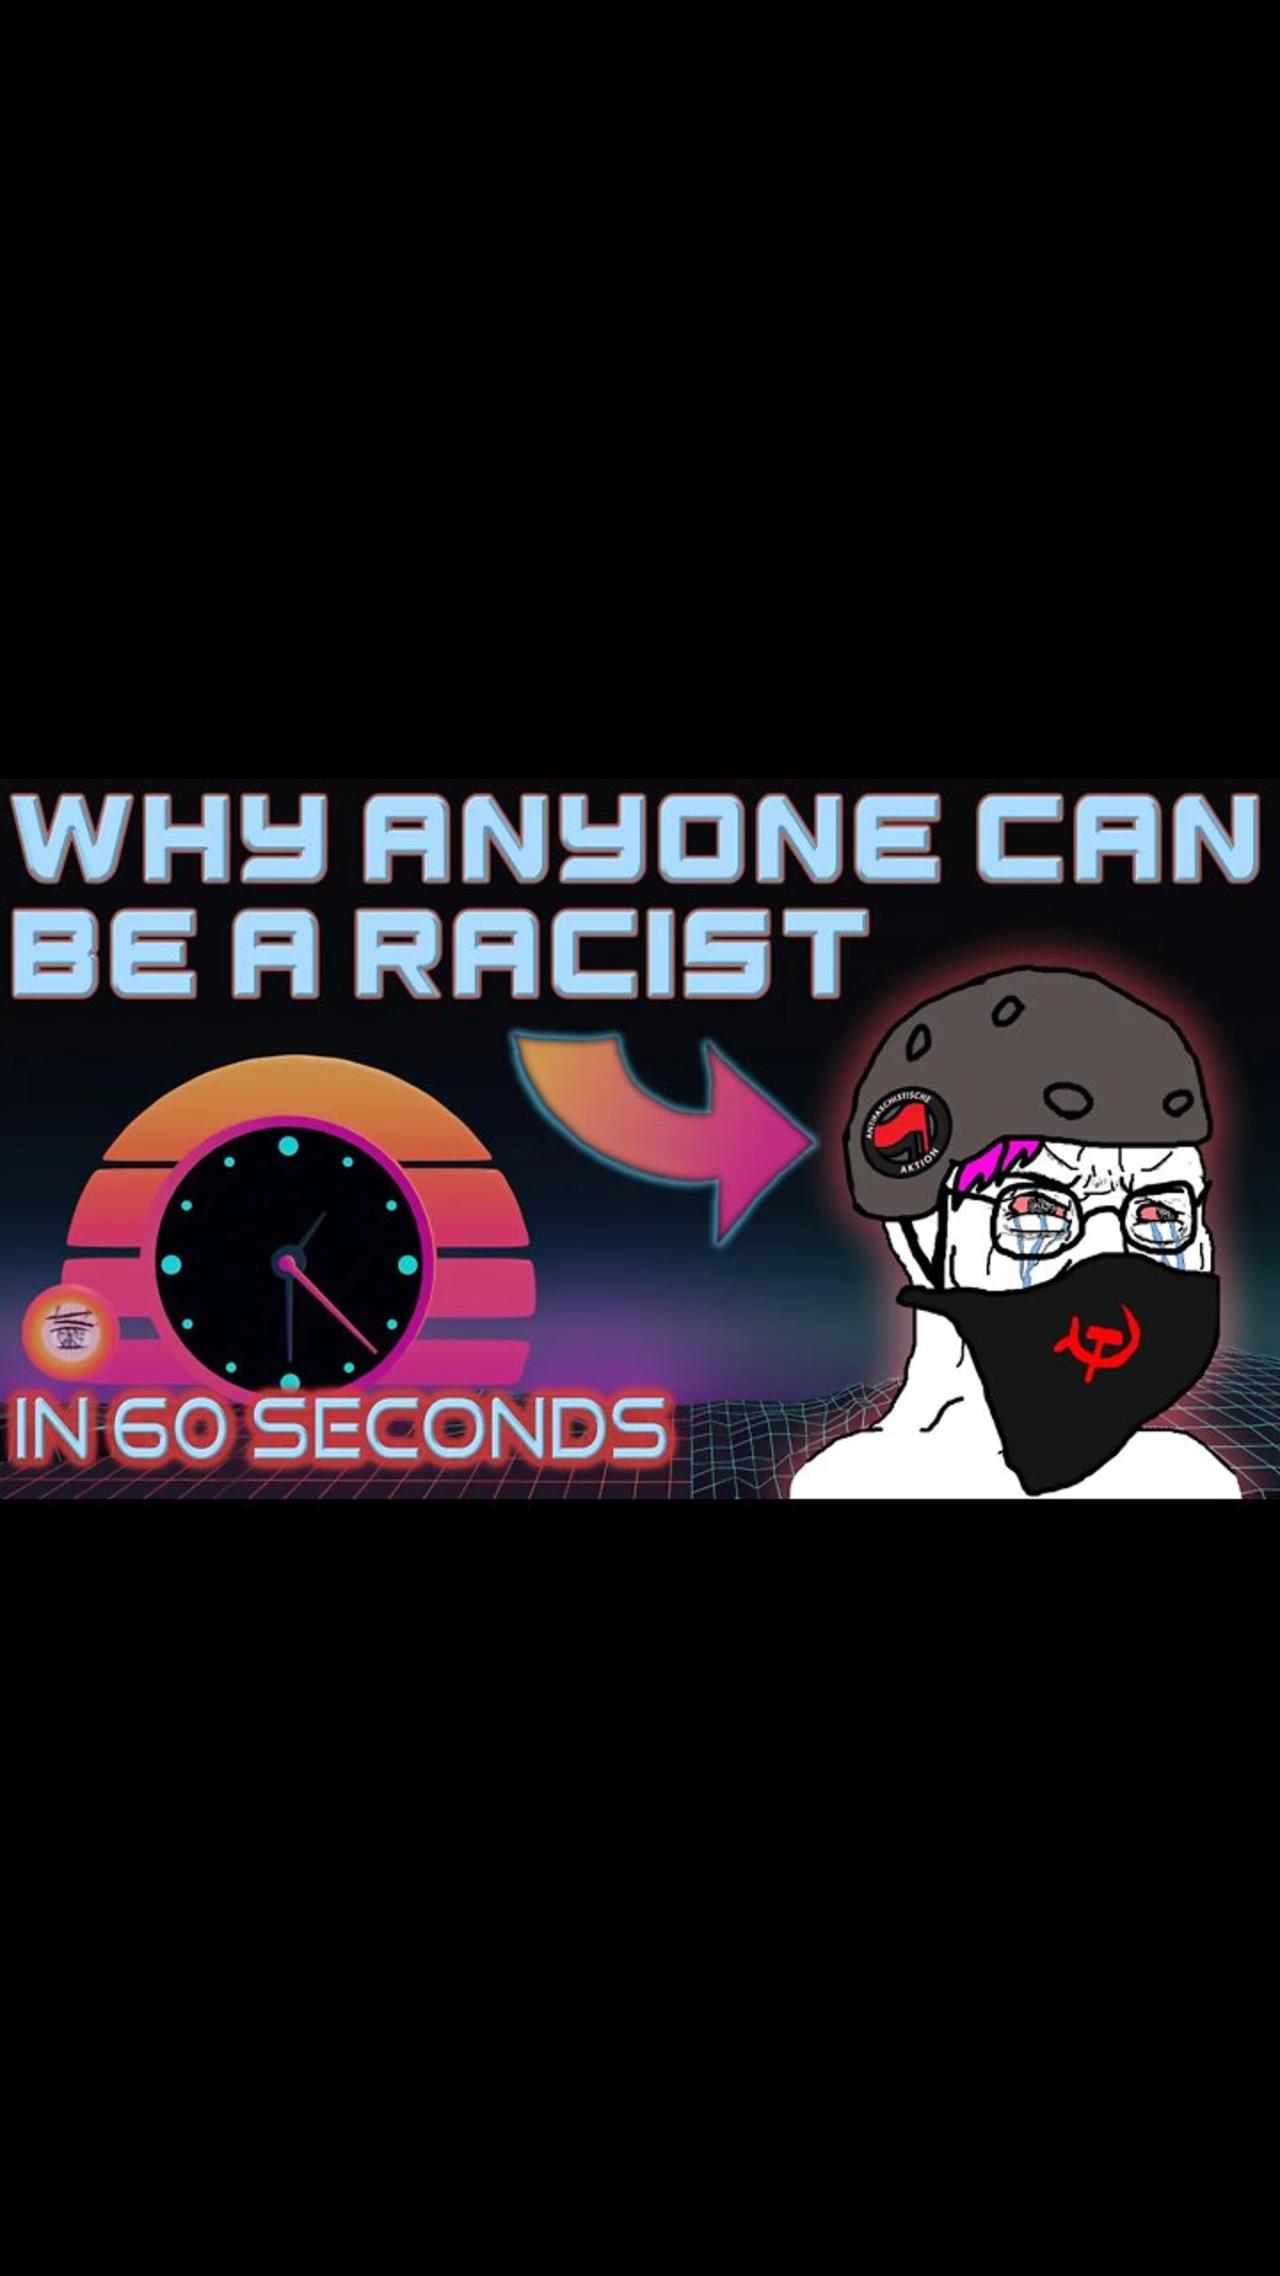 "Only White People can be Racist" - CRT Stupidity refuted in 60 Seconds #Shorts